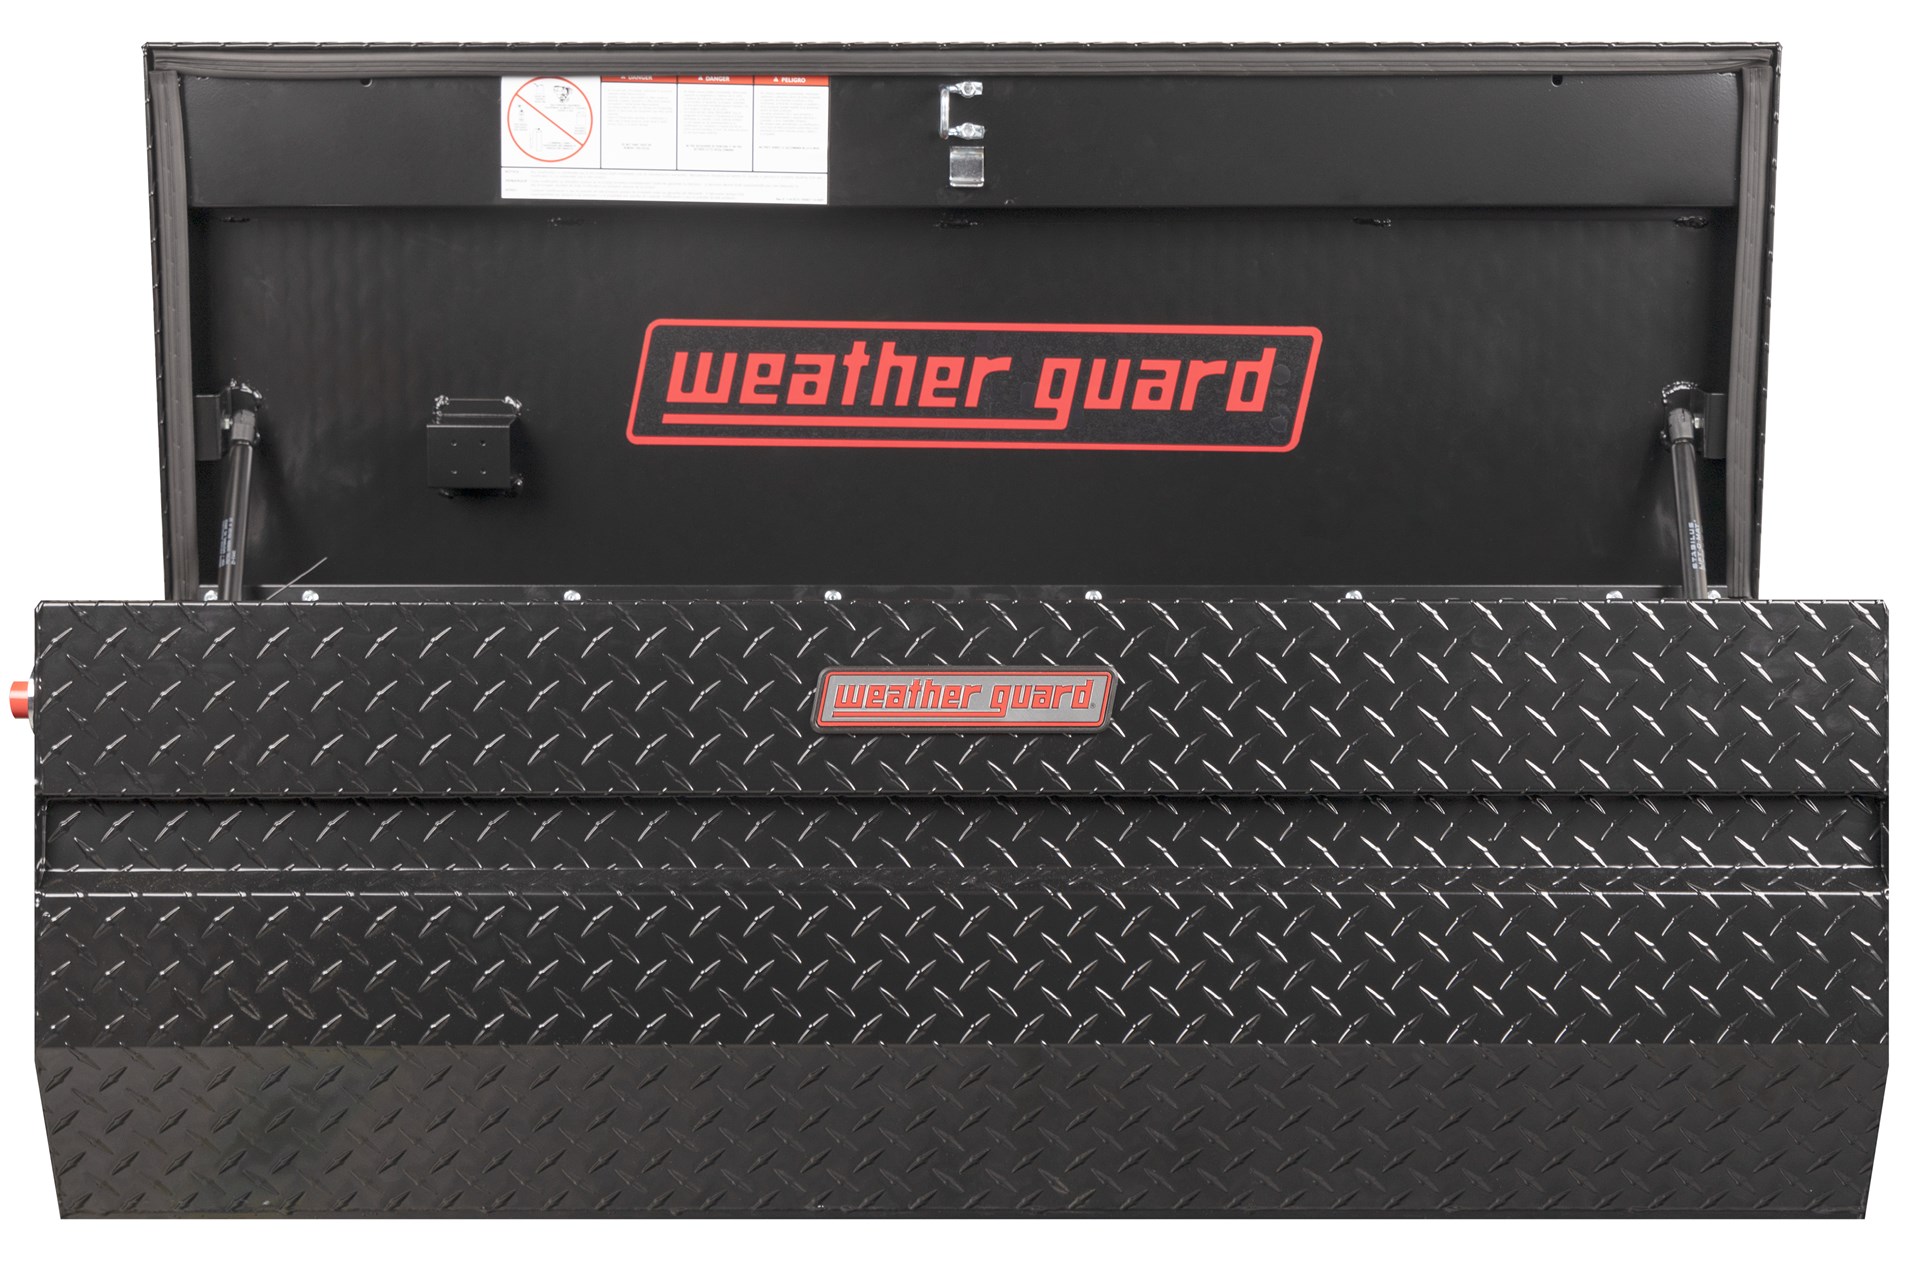 Weather Guard all-purpose chests